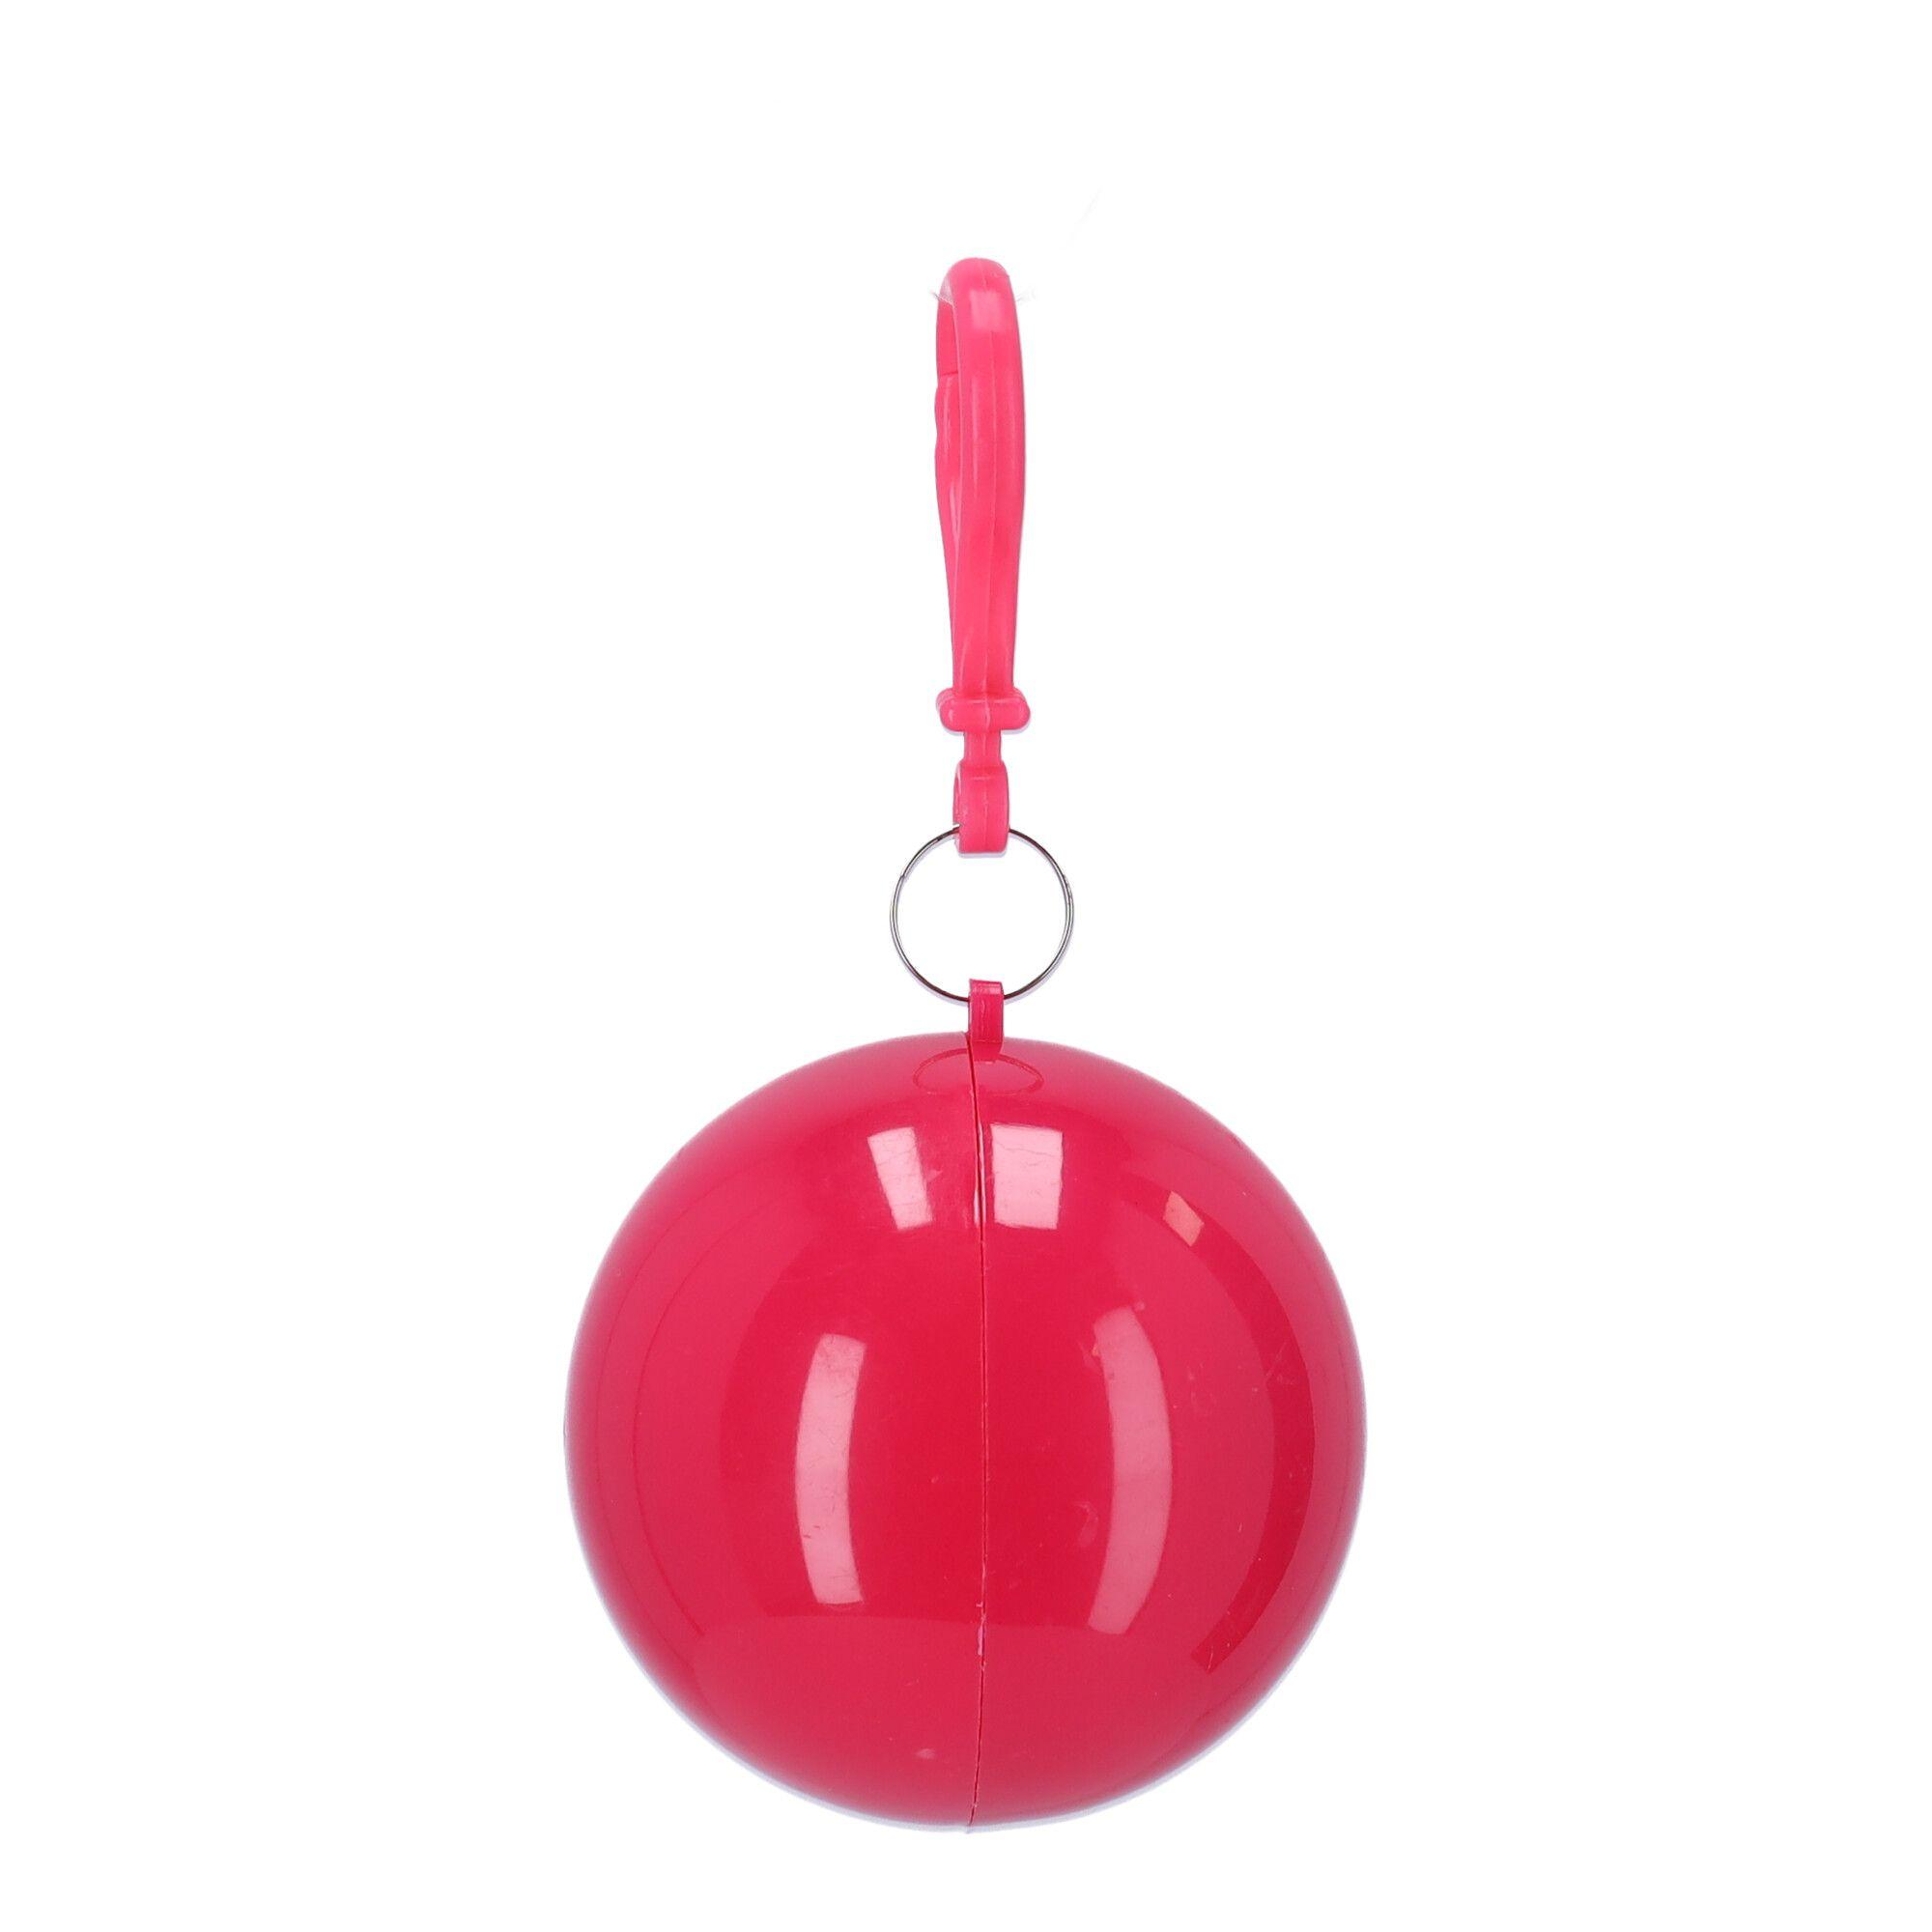 Cloak, rain cape in a ball with carabiner - pink